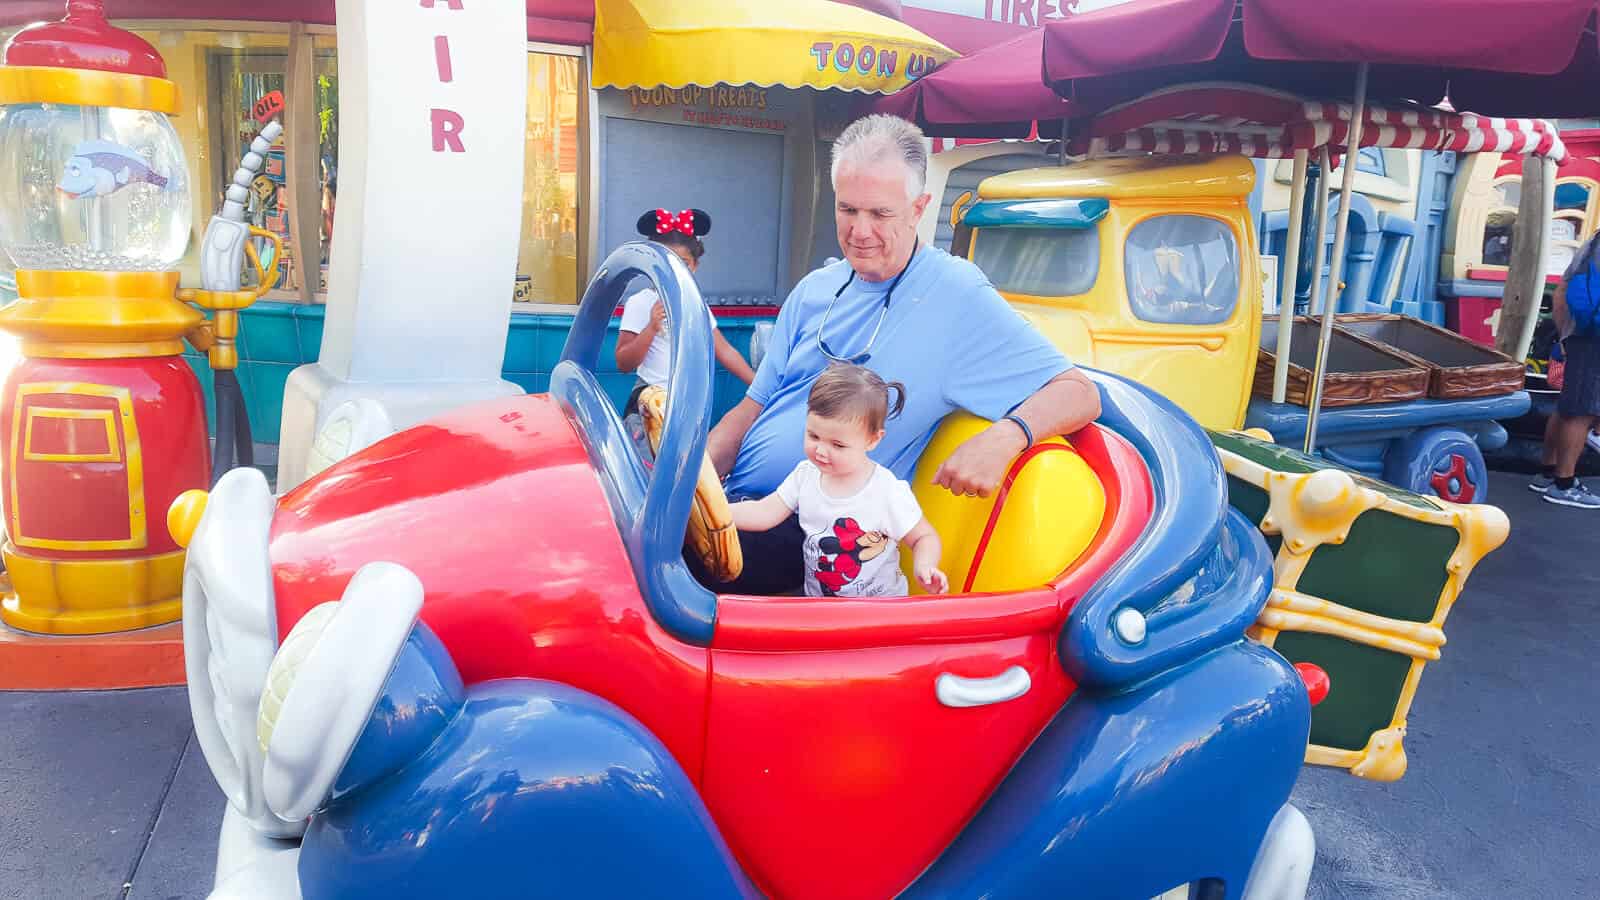 Toddler girl and grandfather on ride at Disney.